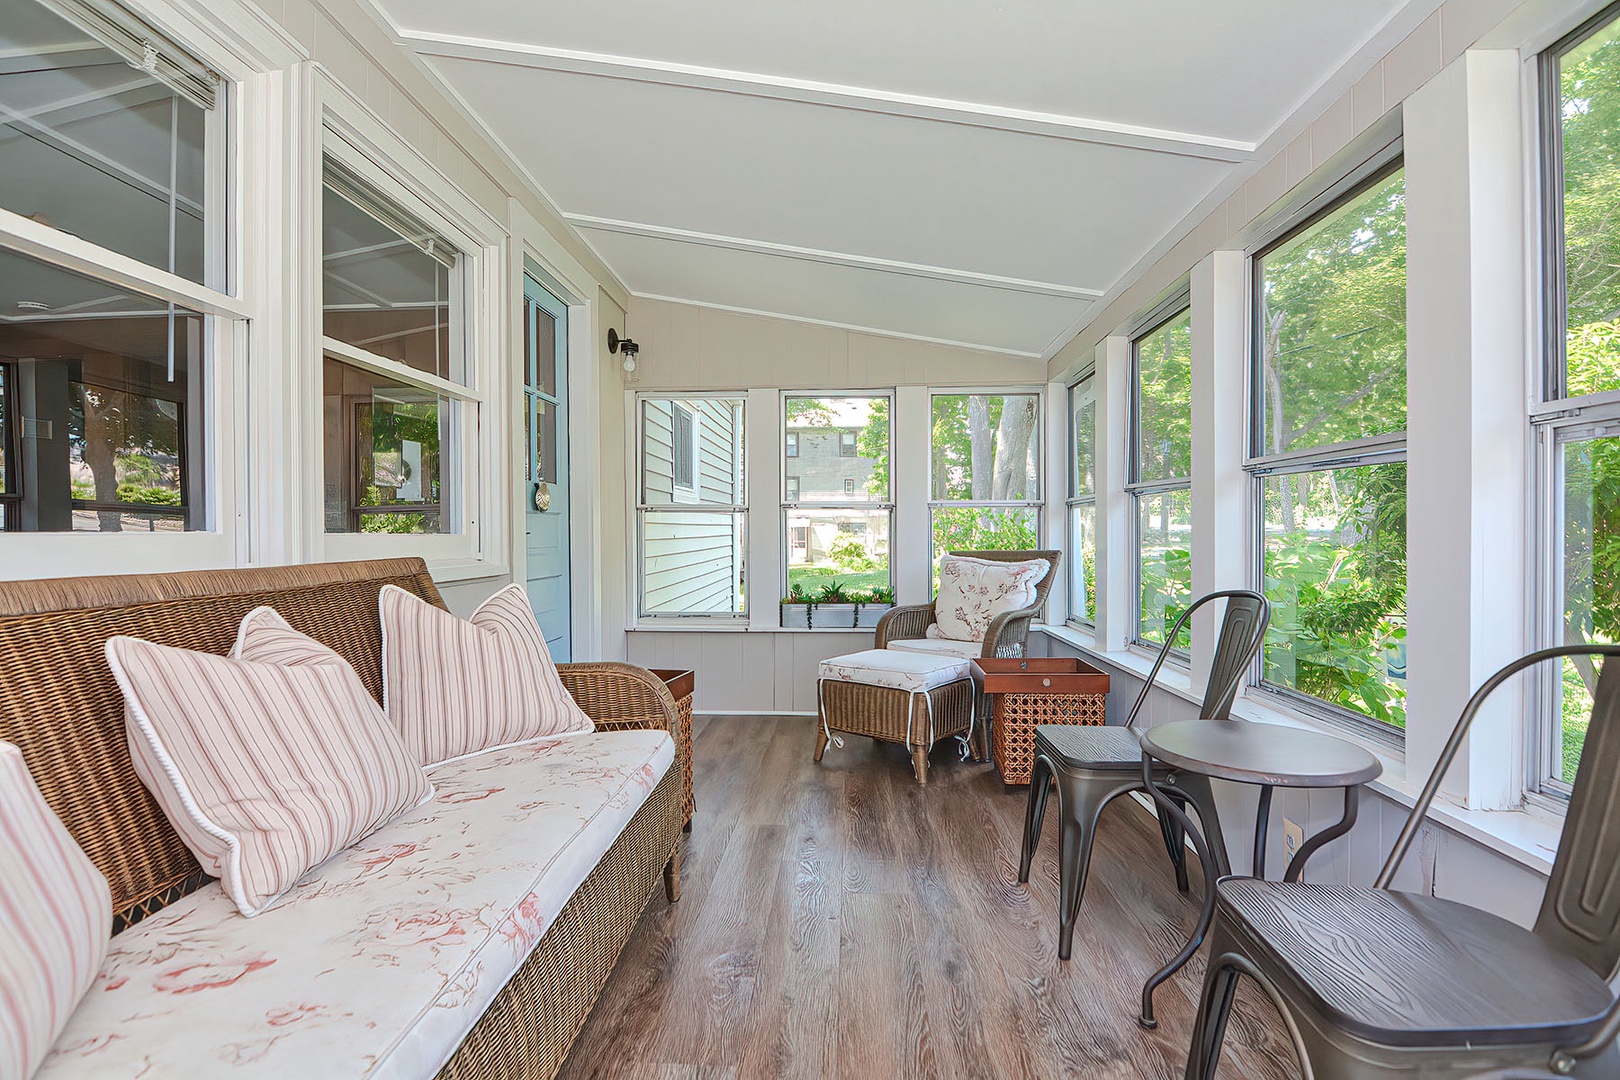 Enter the cottage through the bright and cozy sunroom.